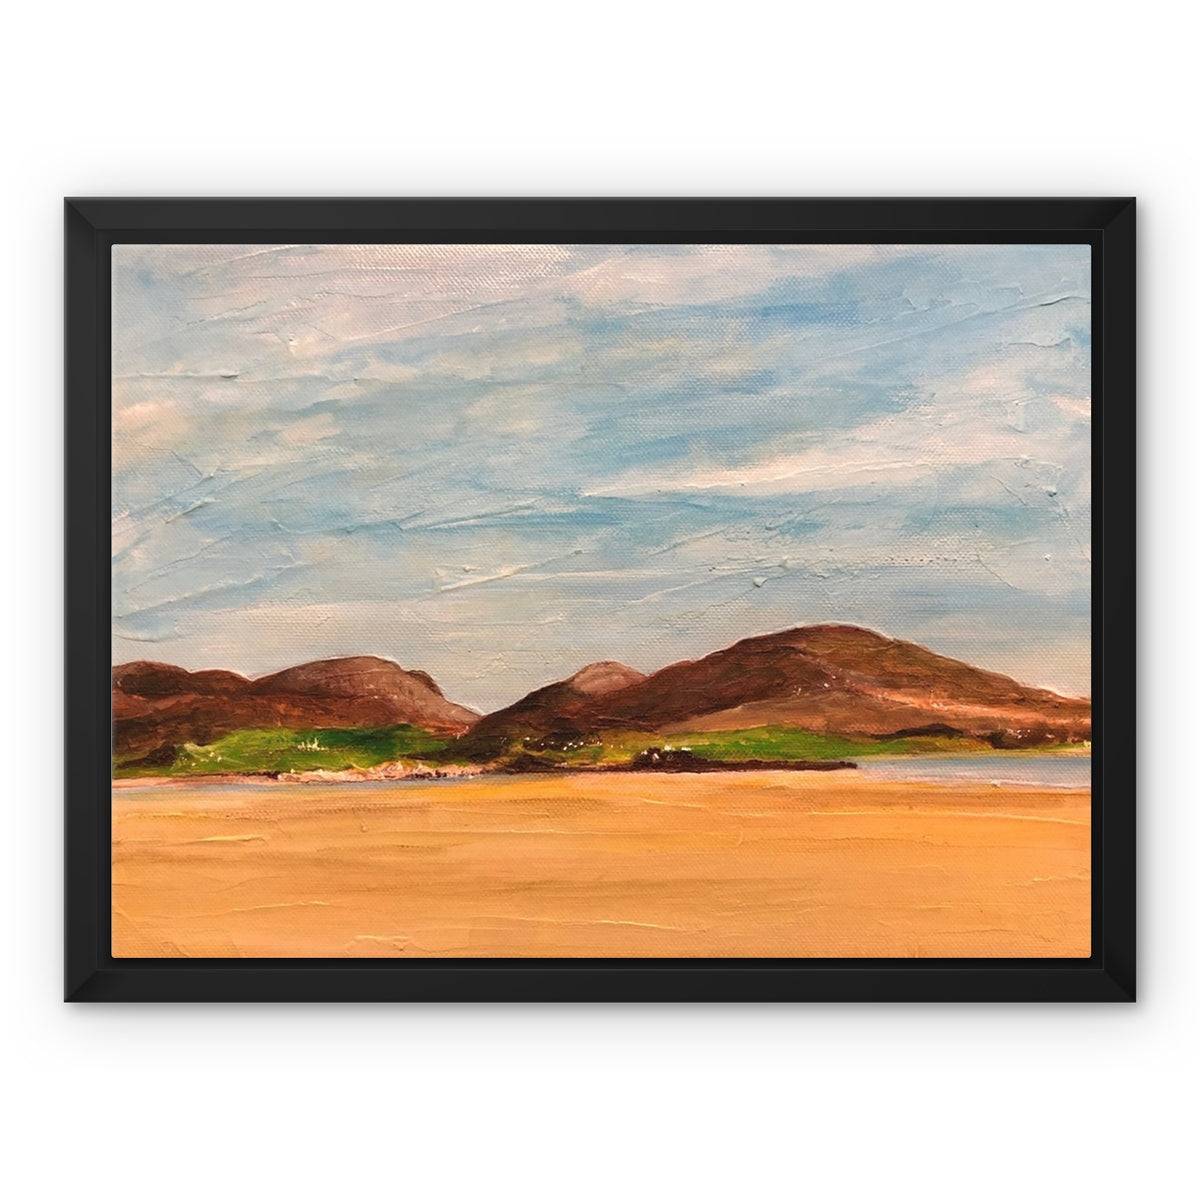 Uig Sands Lewis Painting | Framed Canvas From Scotland-Floating Framed Canvas Prints-Hebridean Islands Art Gallery-12"x8"-Paintings, Prints, Homeware, Art Gifts From Scotland By Scottish Artist Kevin Hunter